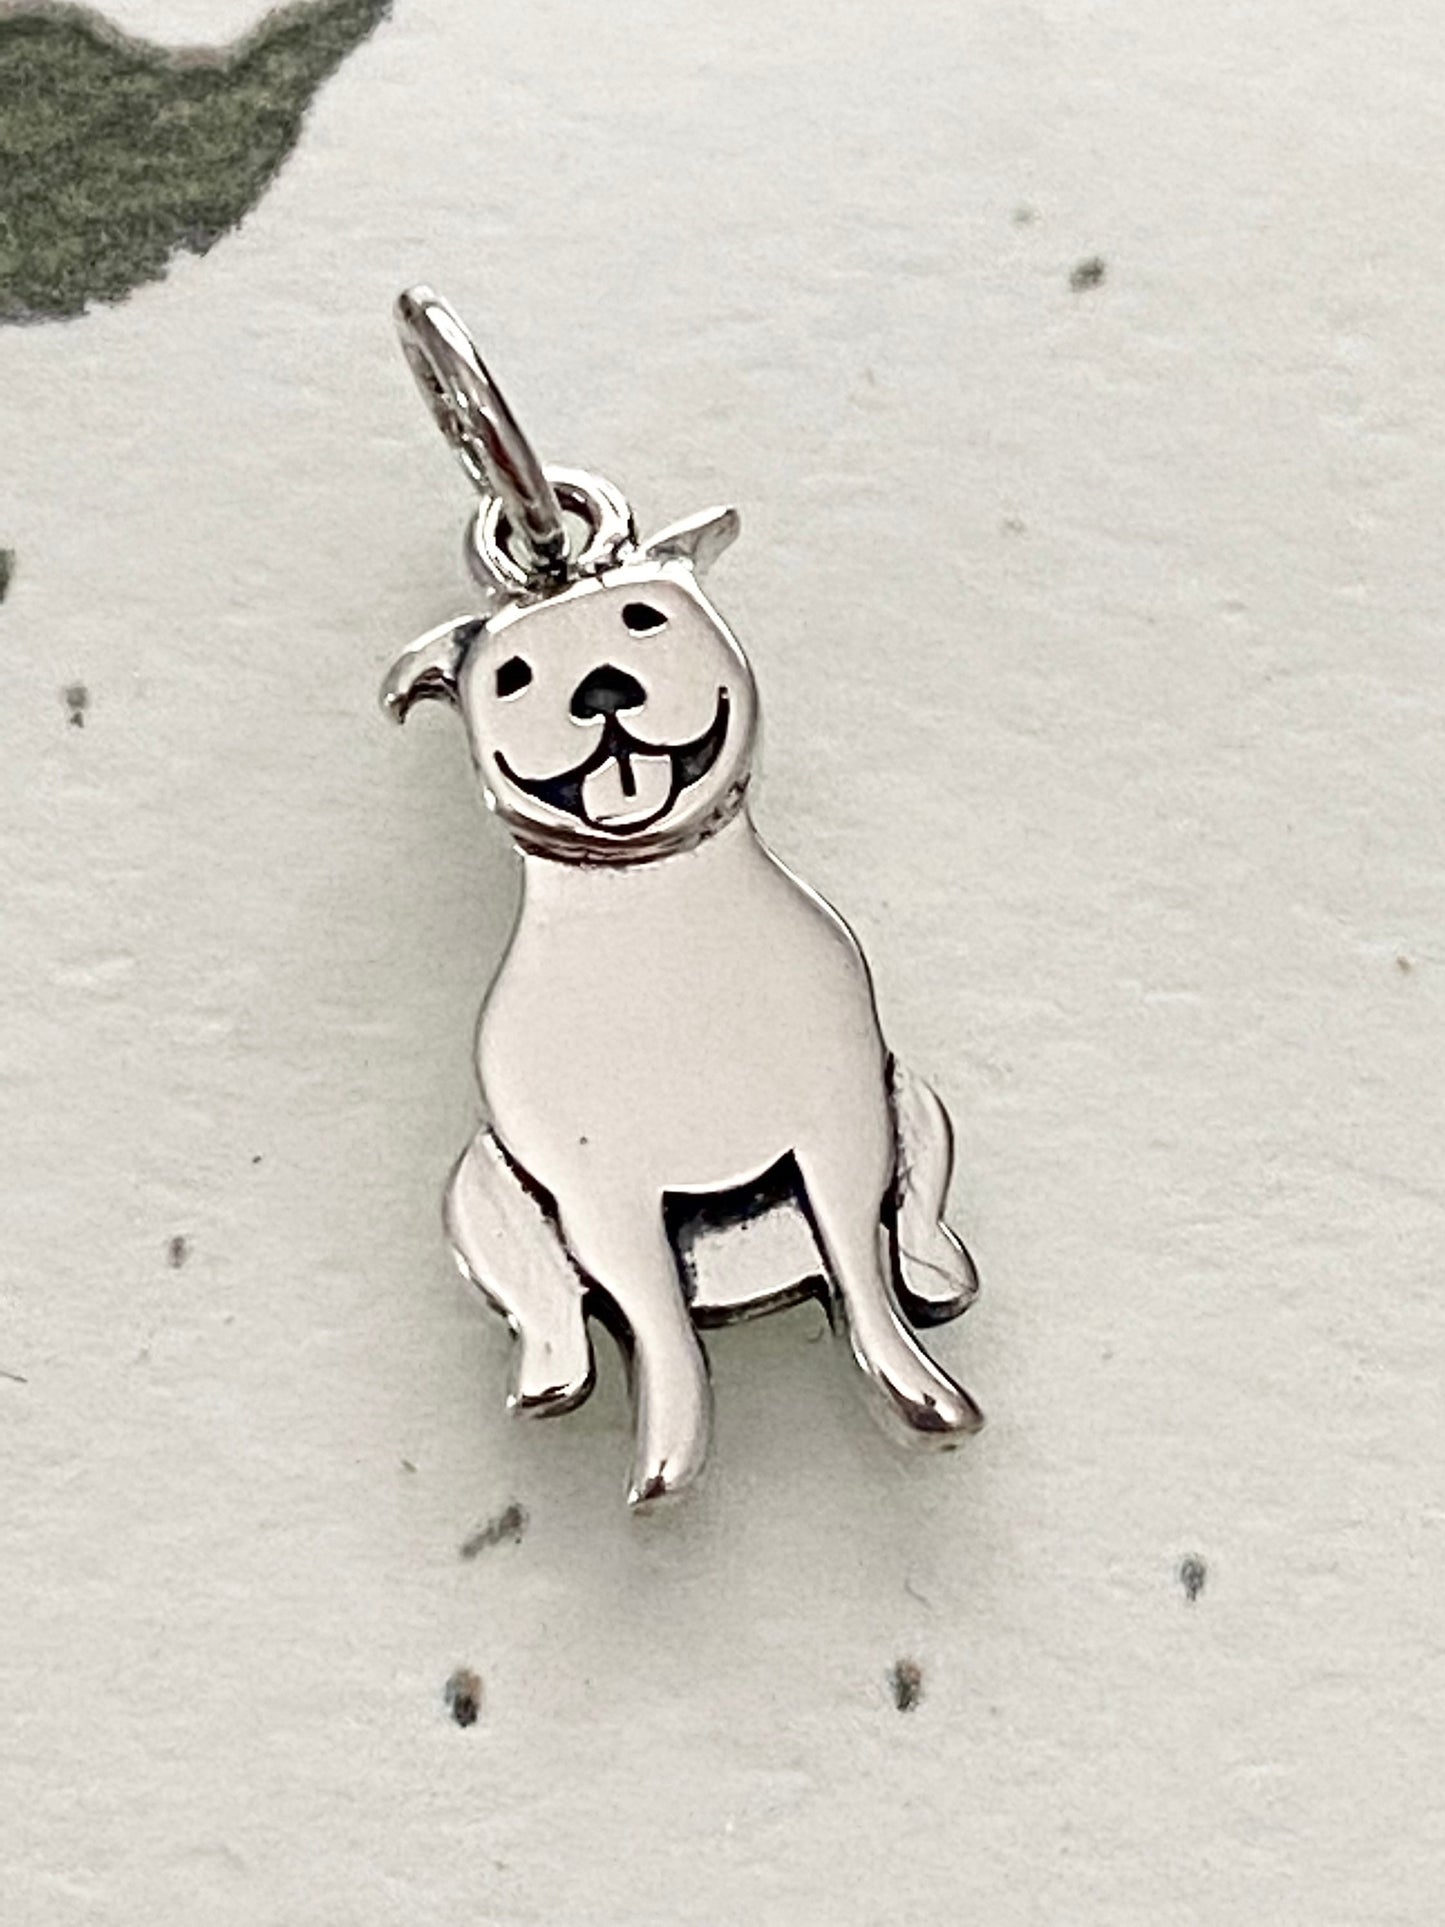 Pitbull Charm Sterling Silver Pendant for Necklace or Bracelets Pit Bull Cute Pup Dog